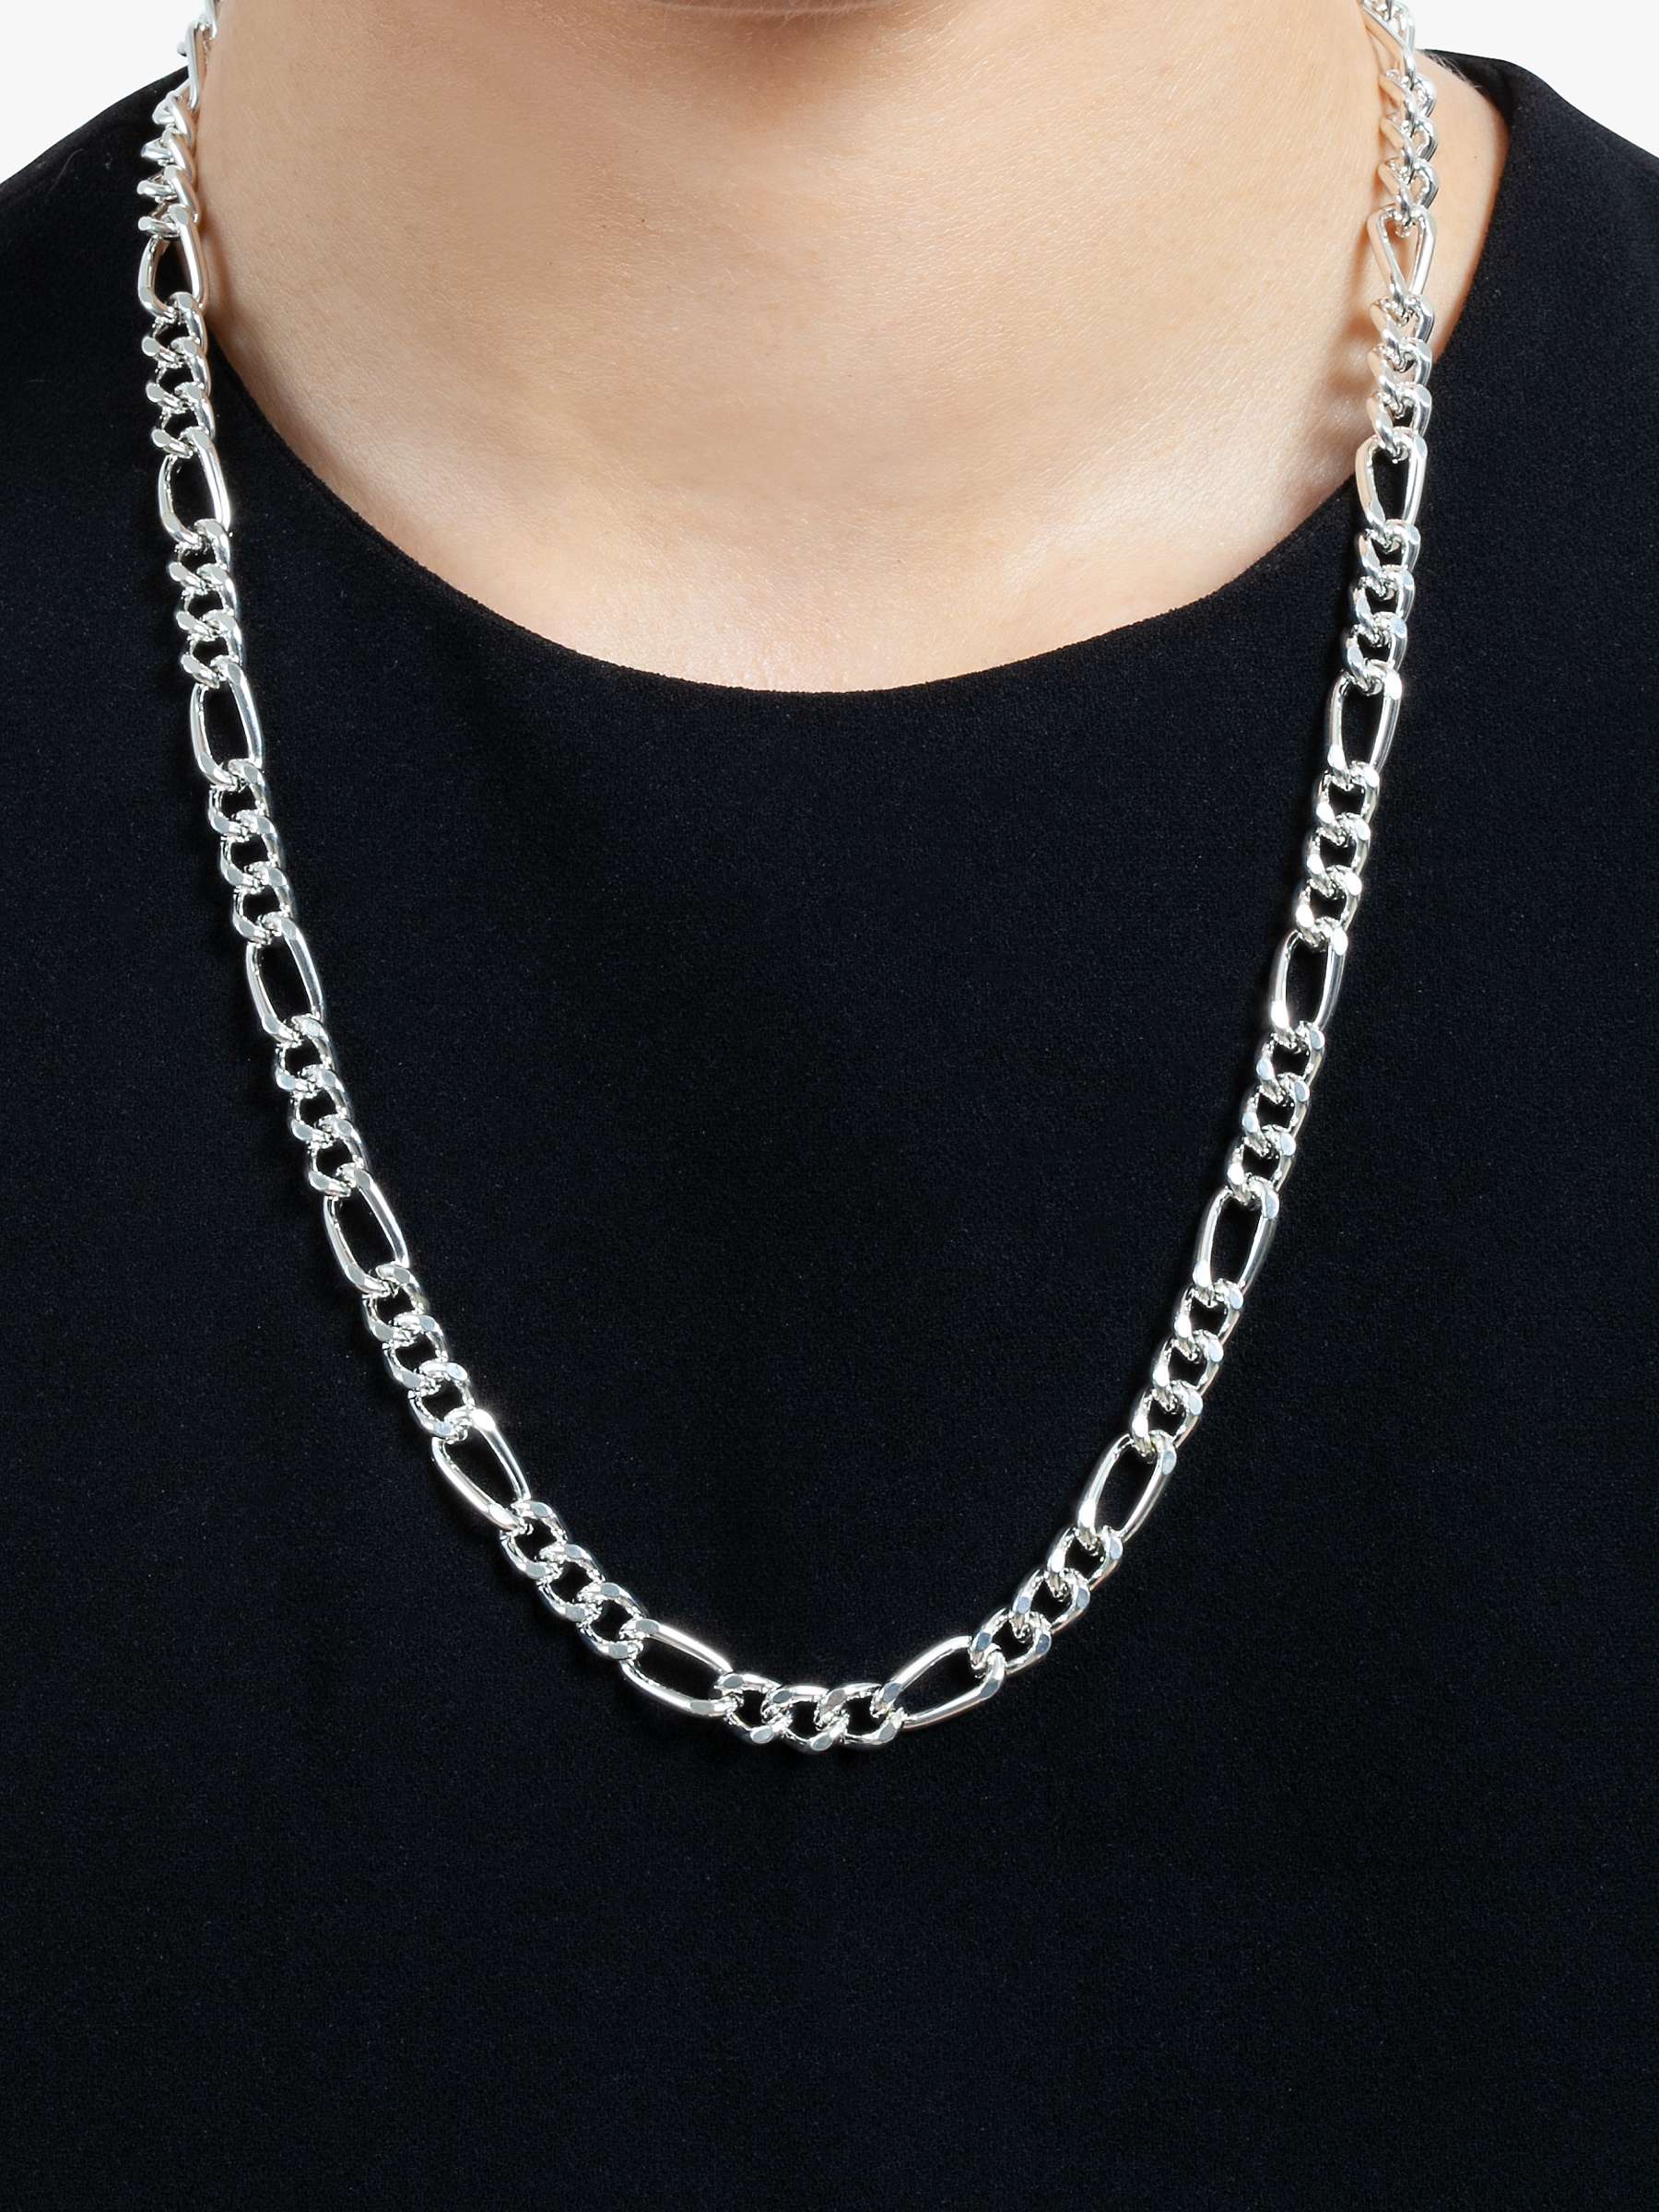 Buy Susan Caplan Vintage Rediscovered Figaro Chain Necklace, Dated Circa 1990s Online at johnlewis.com